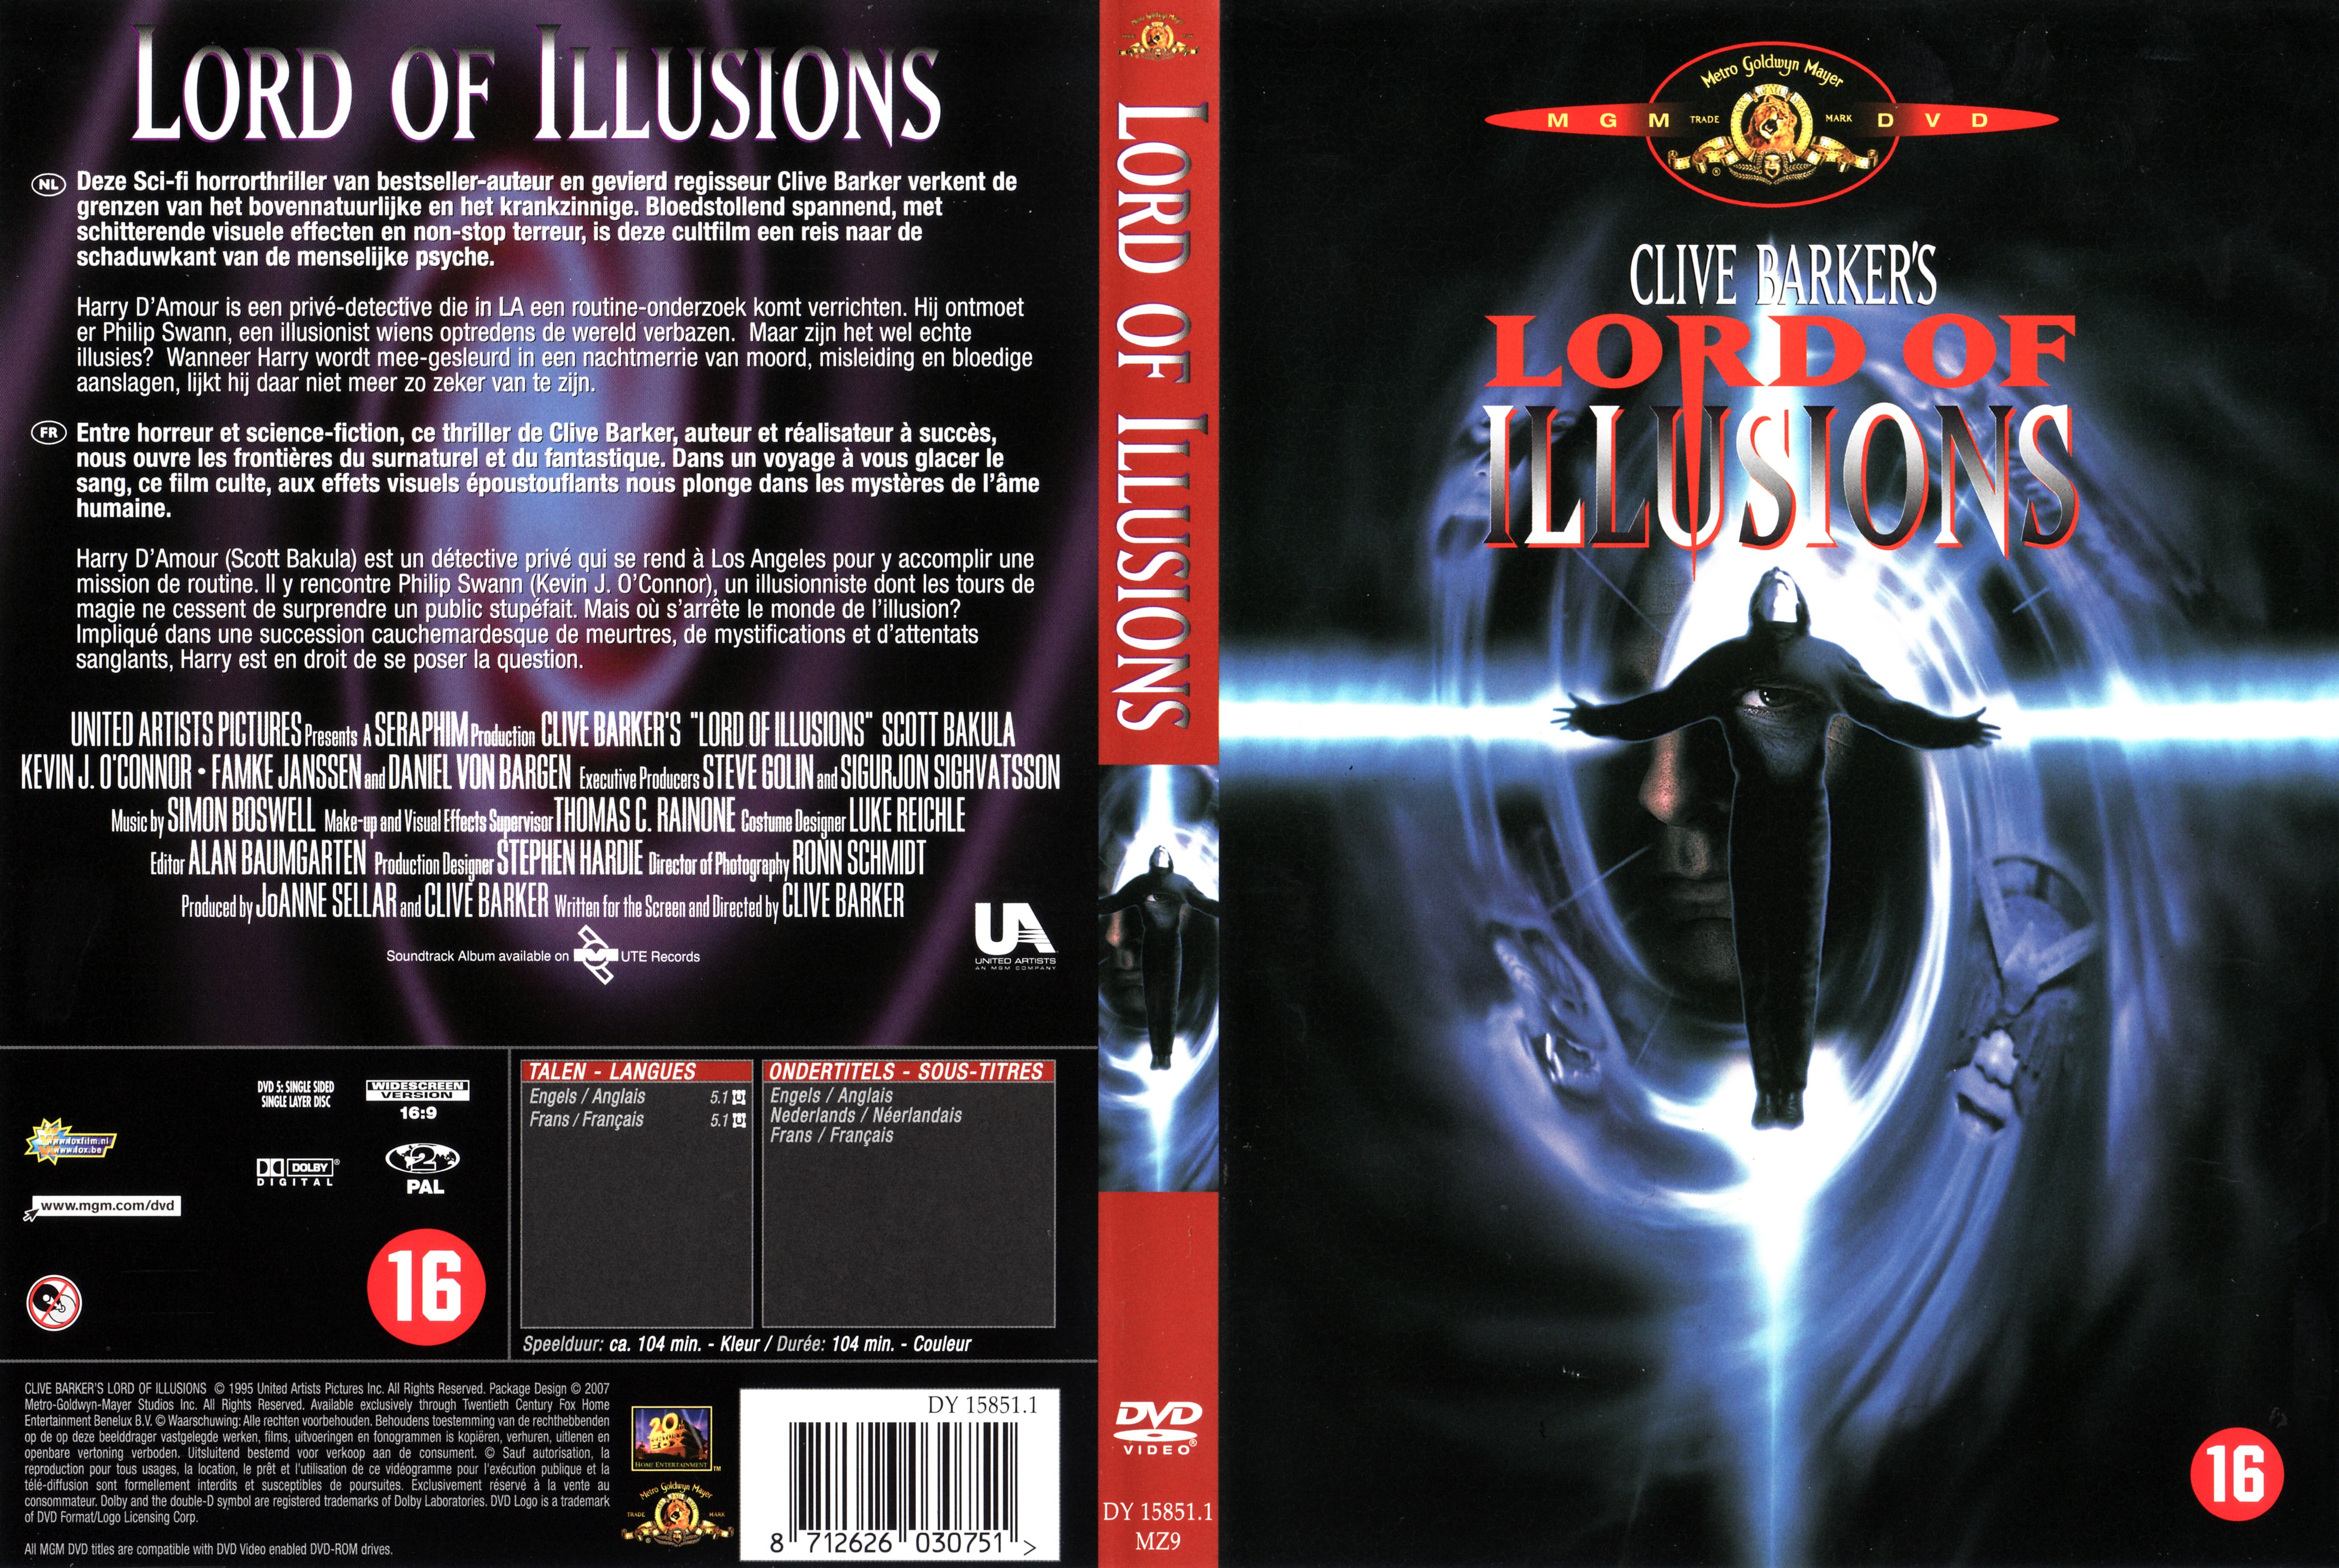 Jaquette DVD Lord of illusions